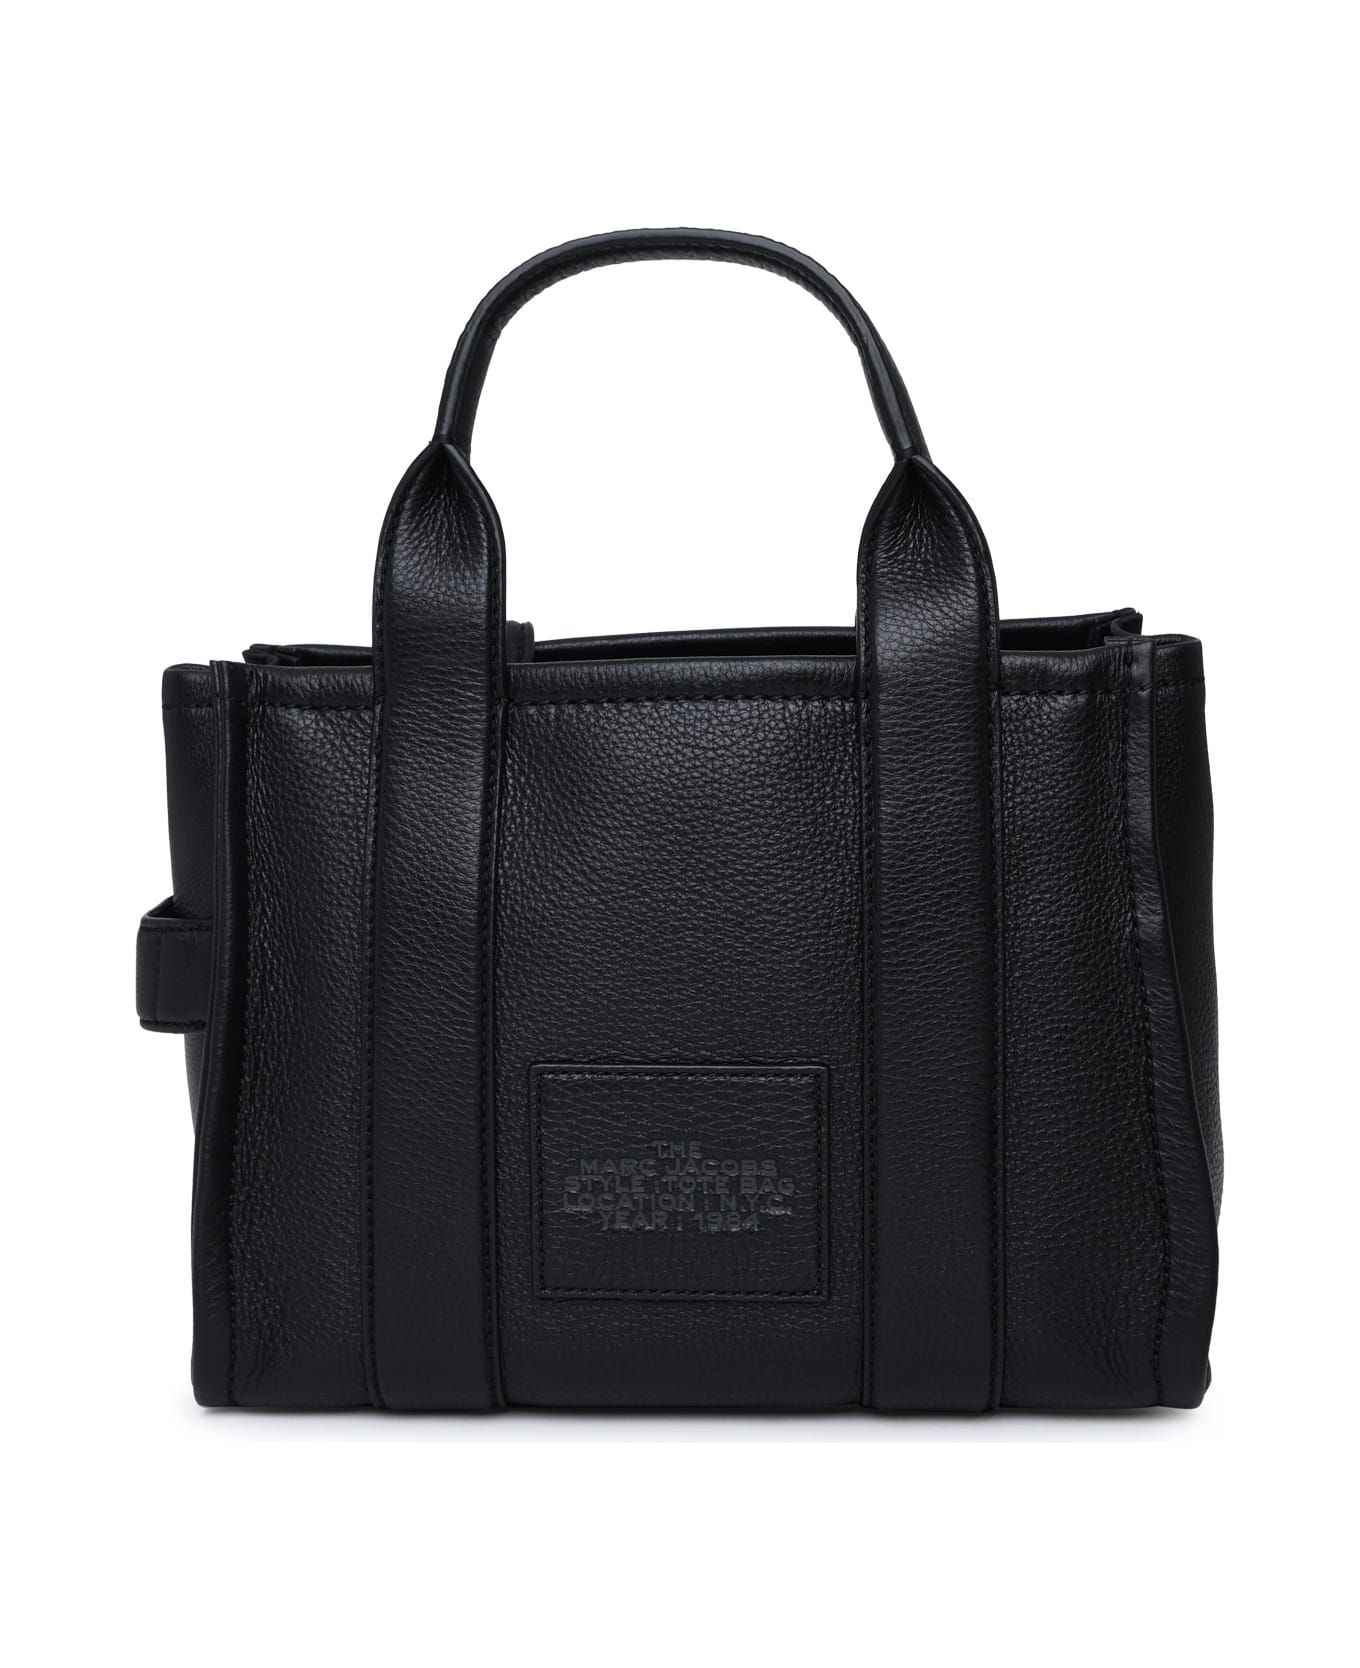 Marc Jacobs The Tote Black Leather Bag - Nero